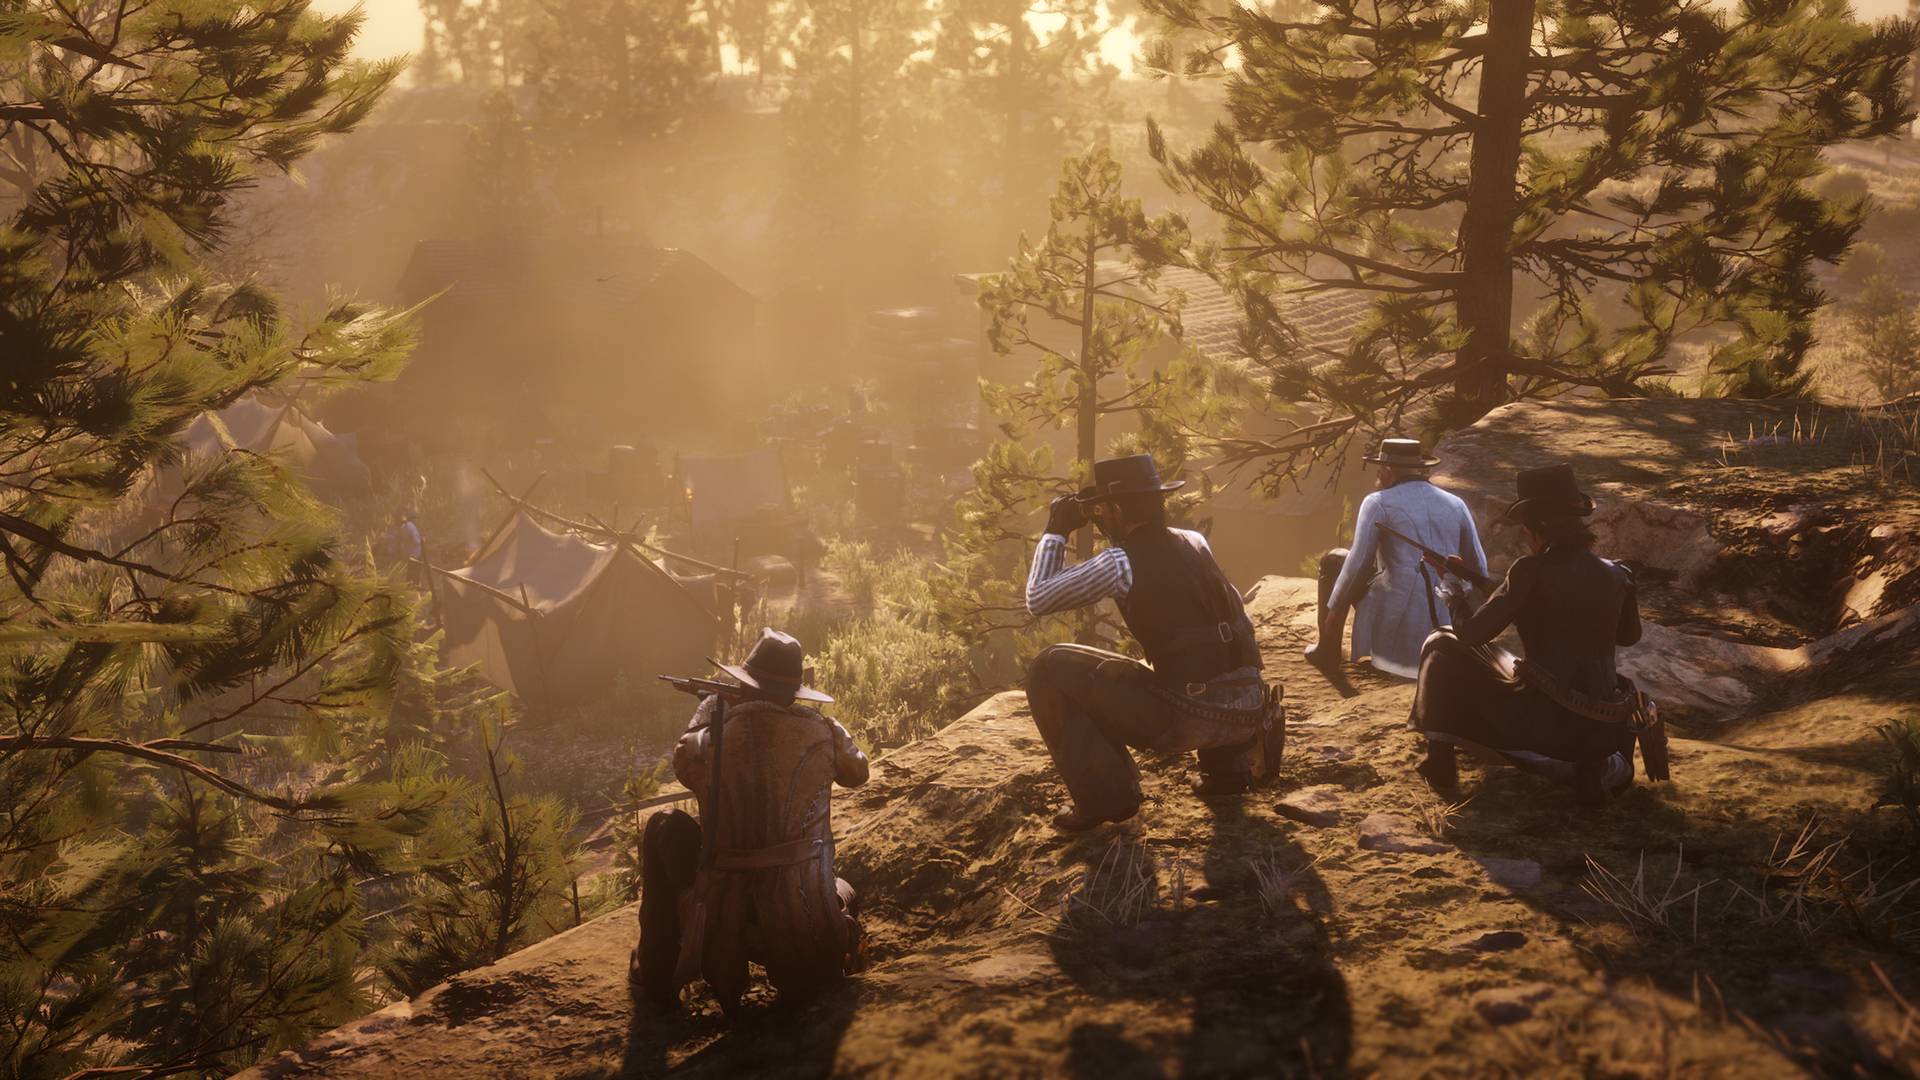 Red Dead Redemption 2 is coming to PC